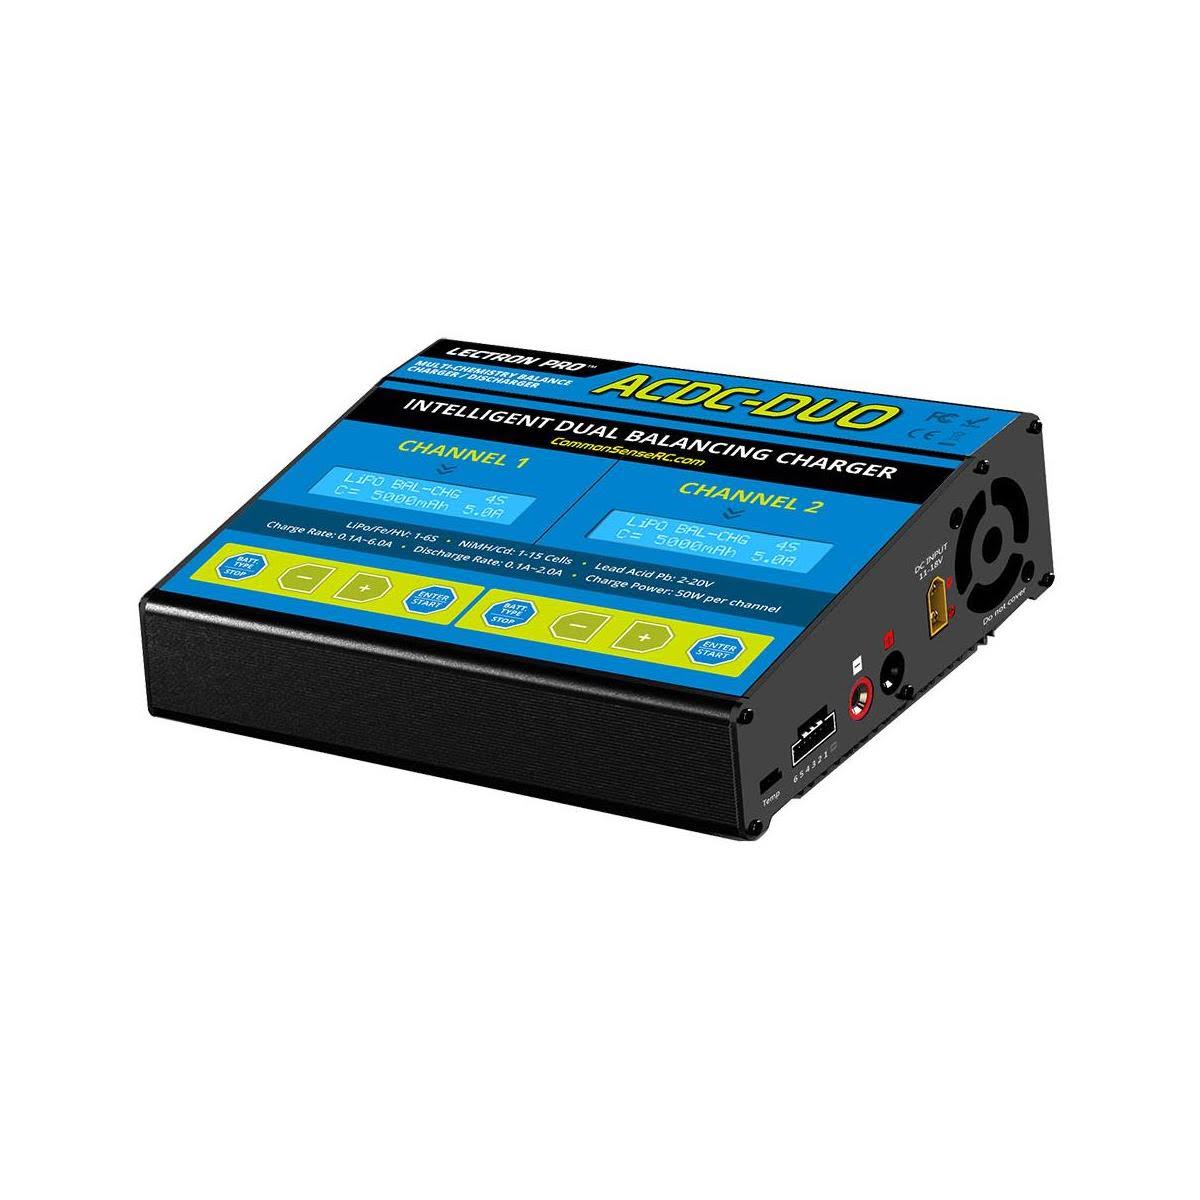 ACDC-DUO - Two-Port Multi-Chemistry Balancing Charger (LiPo/LiFe/LiHV/NiMH)